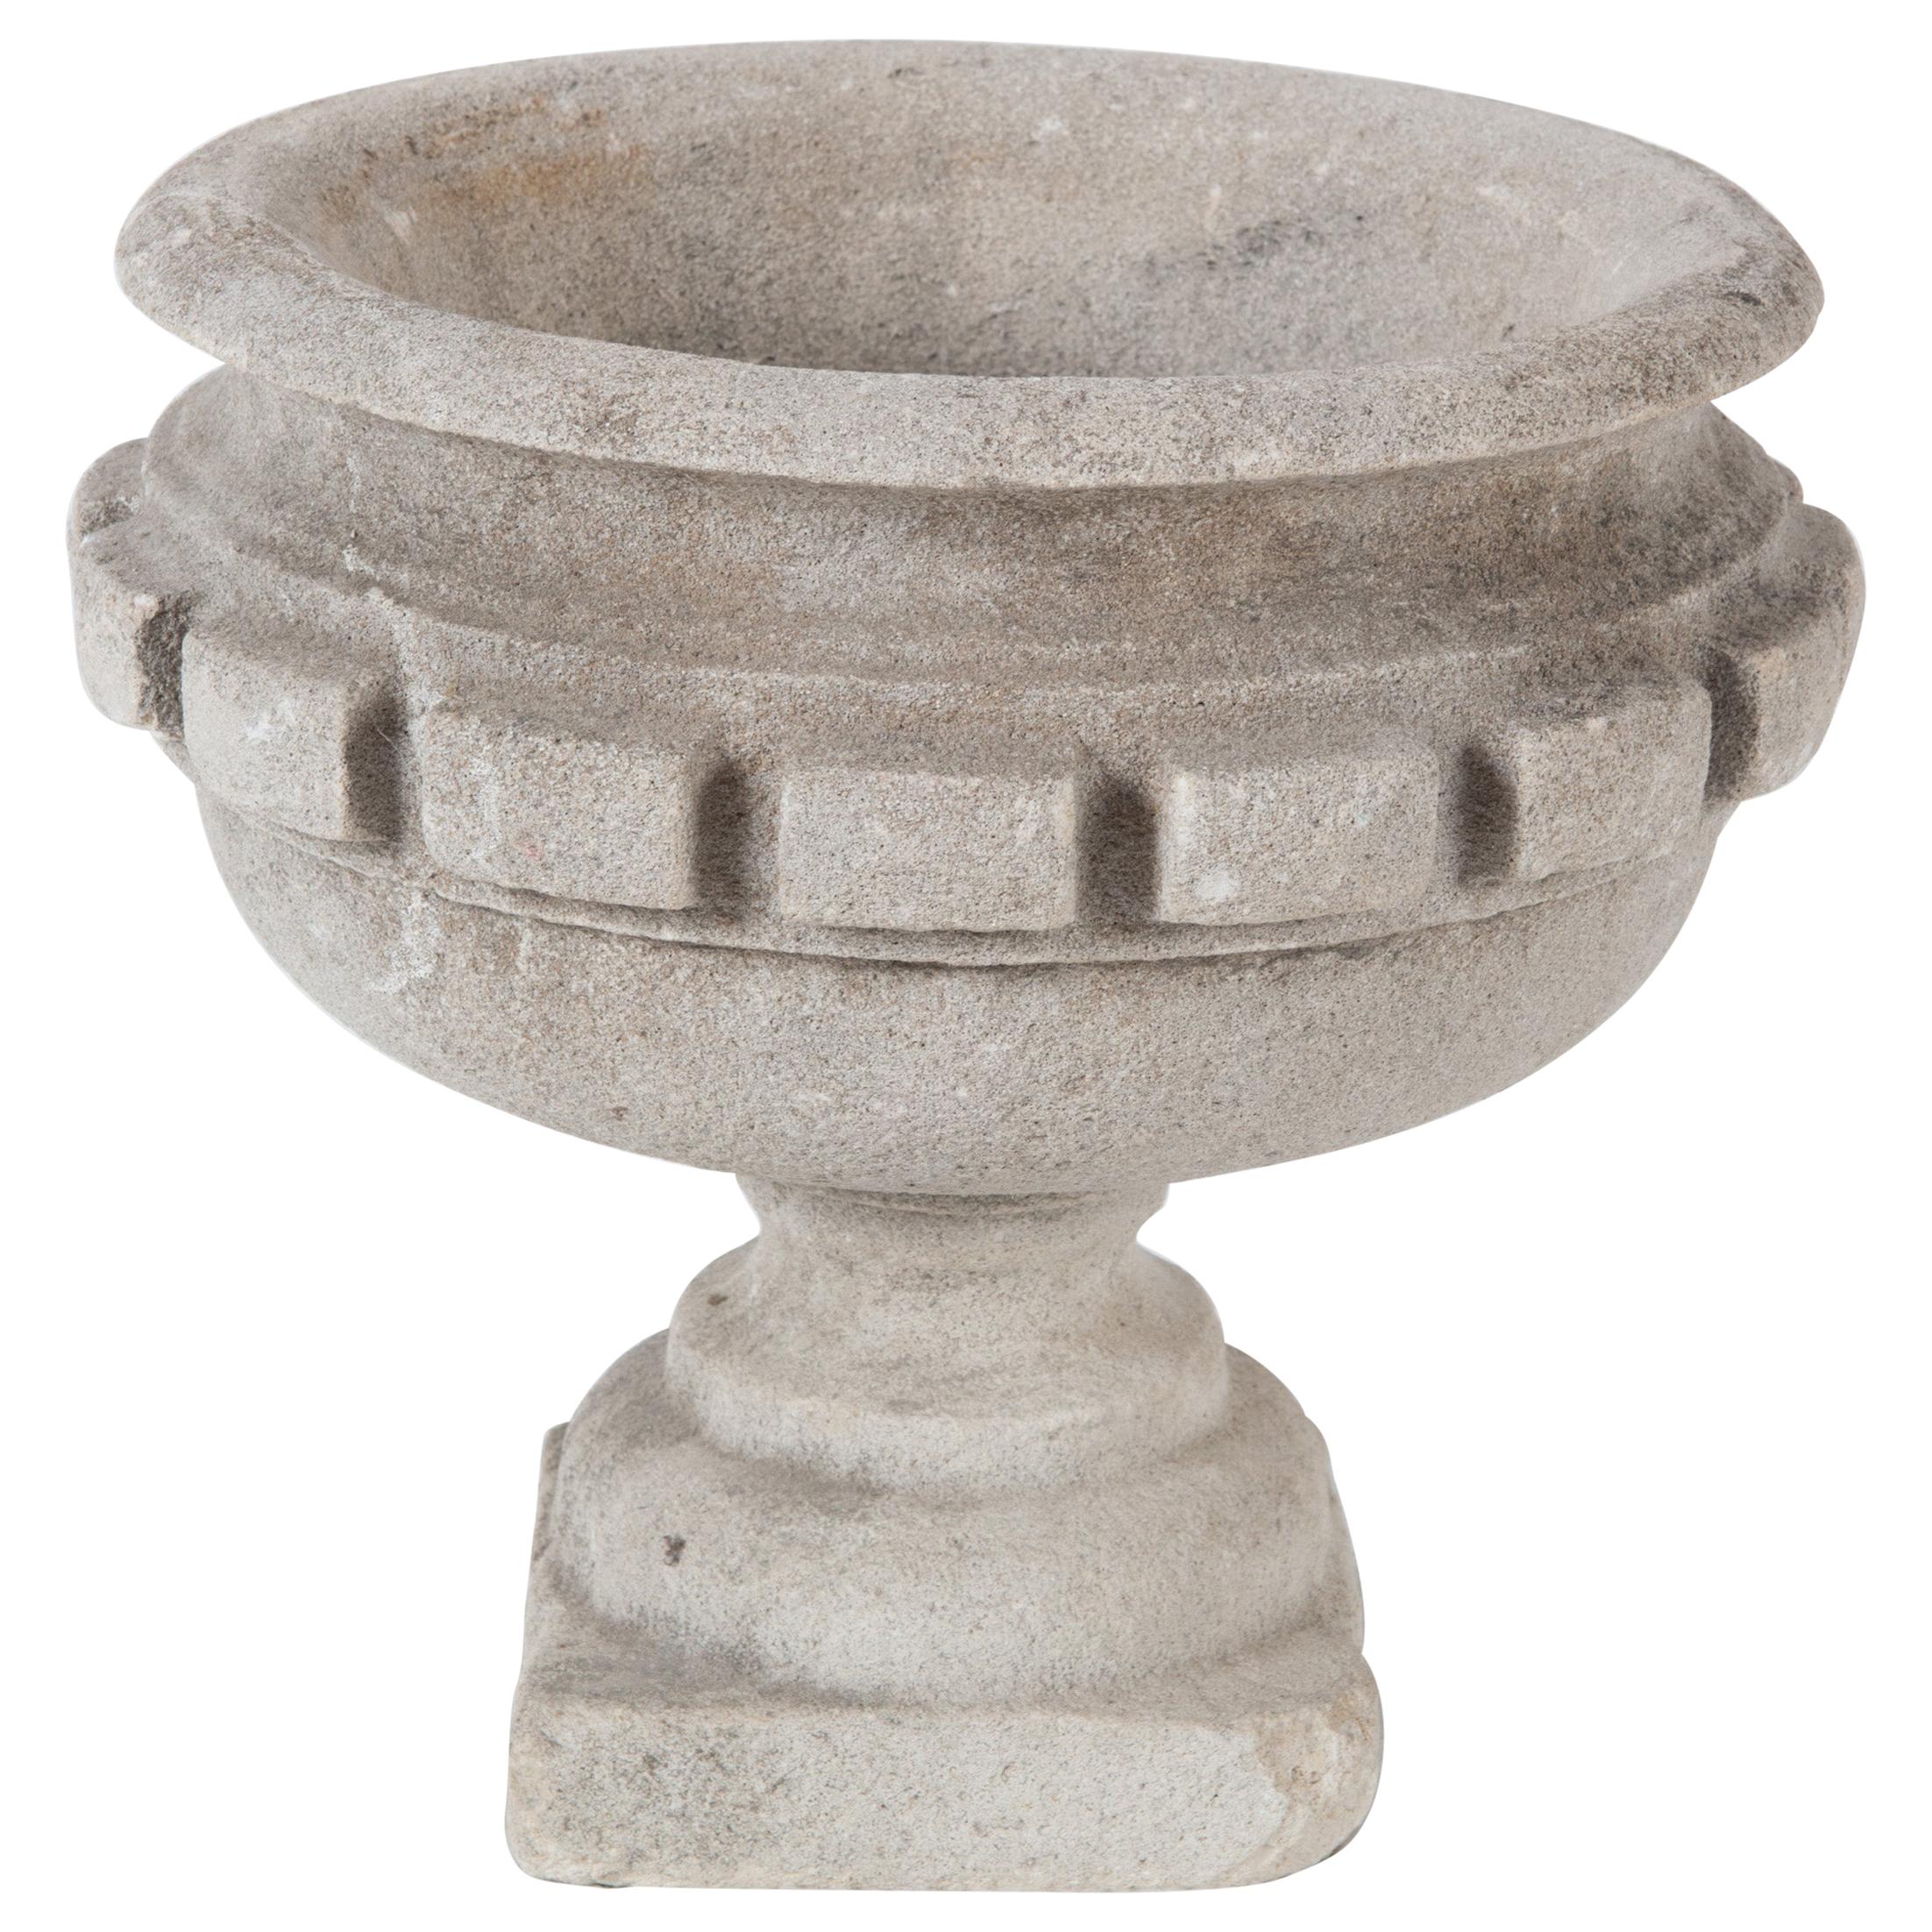 19th Century French Carved Stone Planter / Urn with Dental Trim